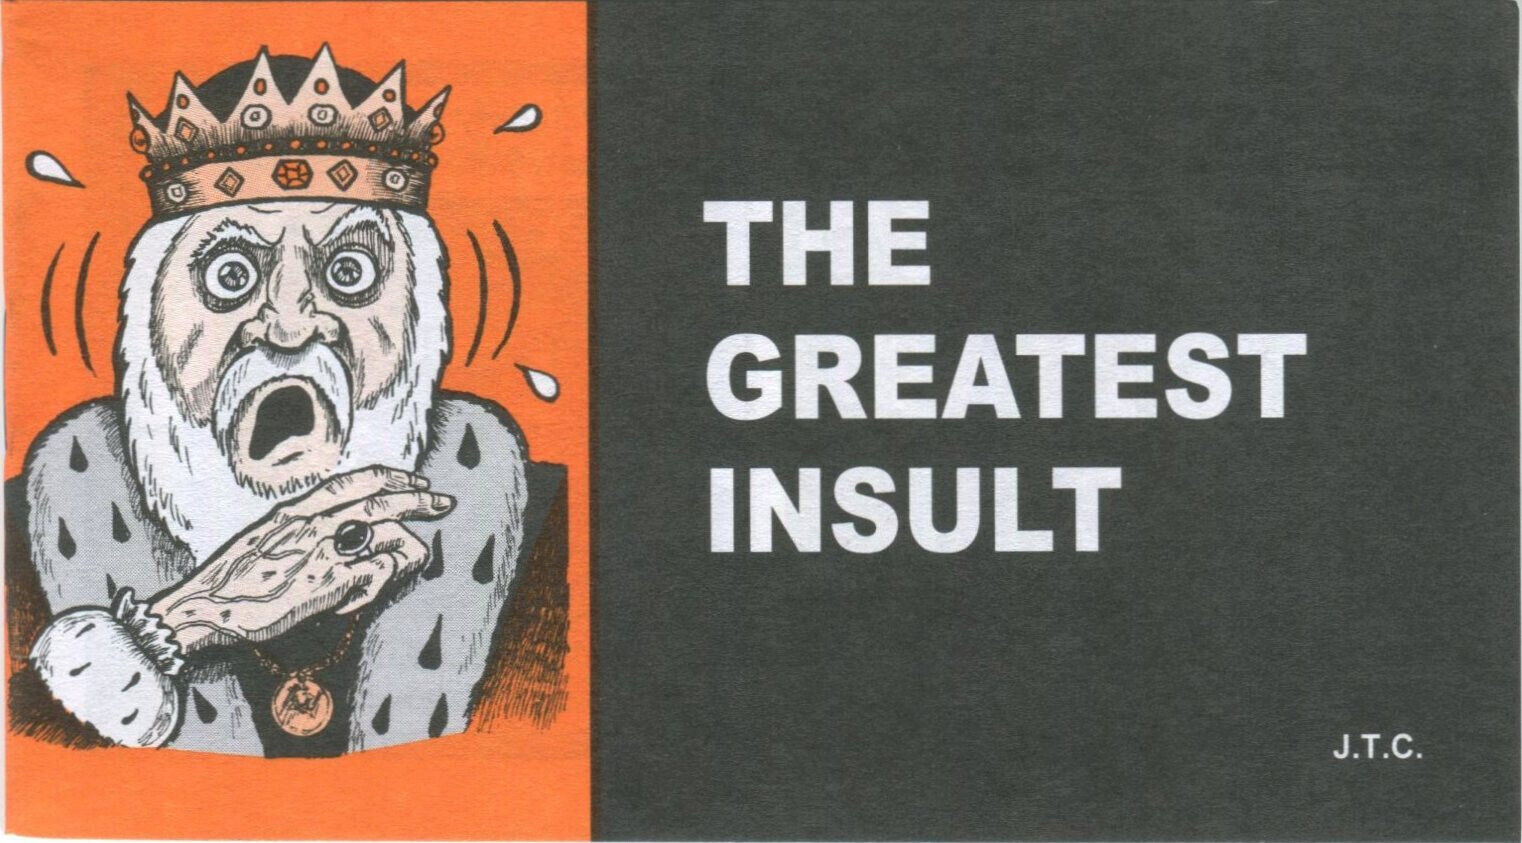 New OOP The Greatest Insult Chick Publications Tract - Jack